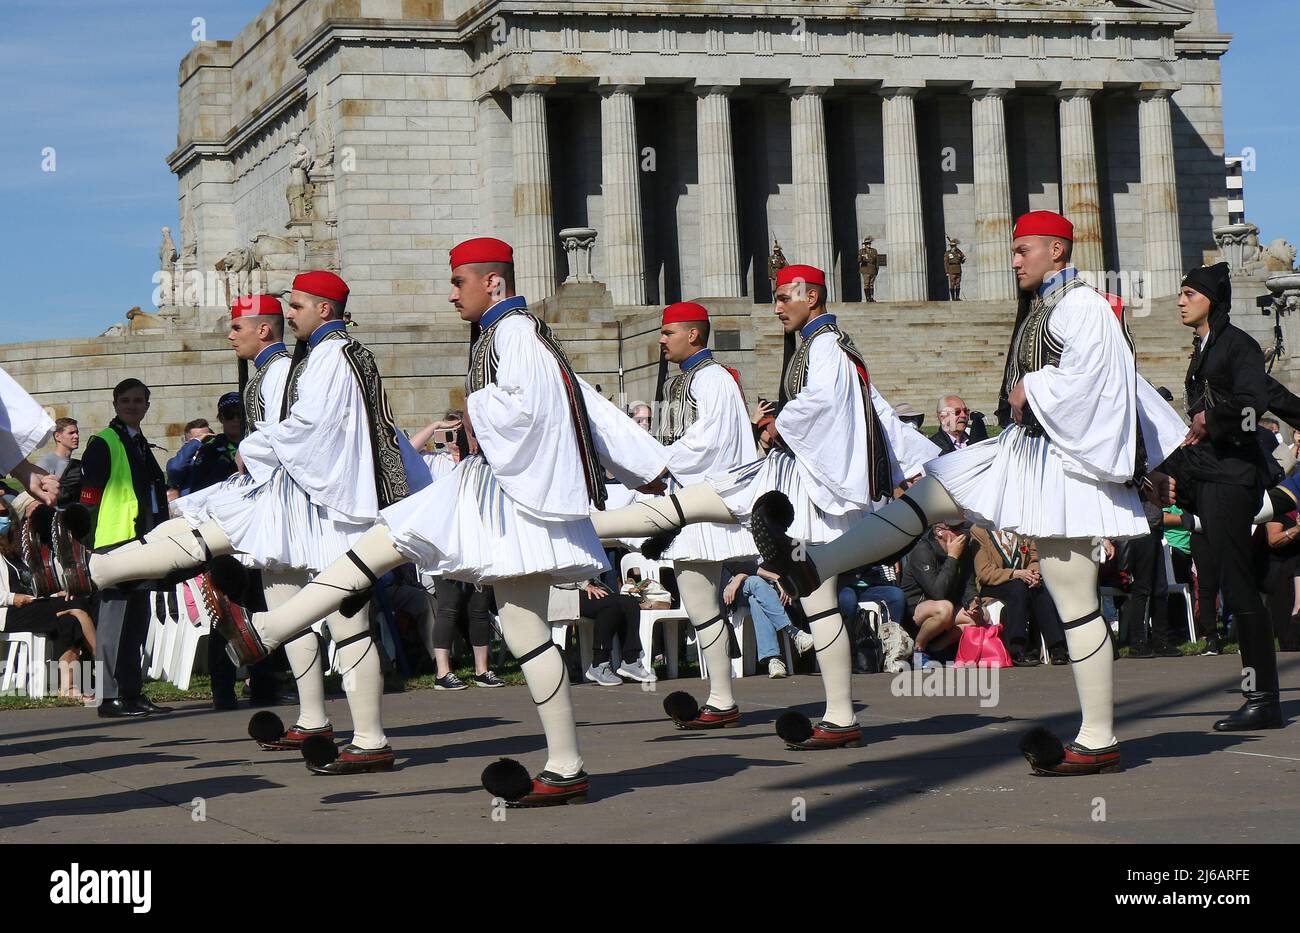 Melbourne Australia: Anzac Day parade at Shrine of Remembrance. ANZAC' stands for Australian and New Zealand Army Corps. Greek soldiers marching. Stock Photo